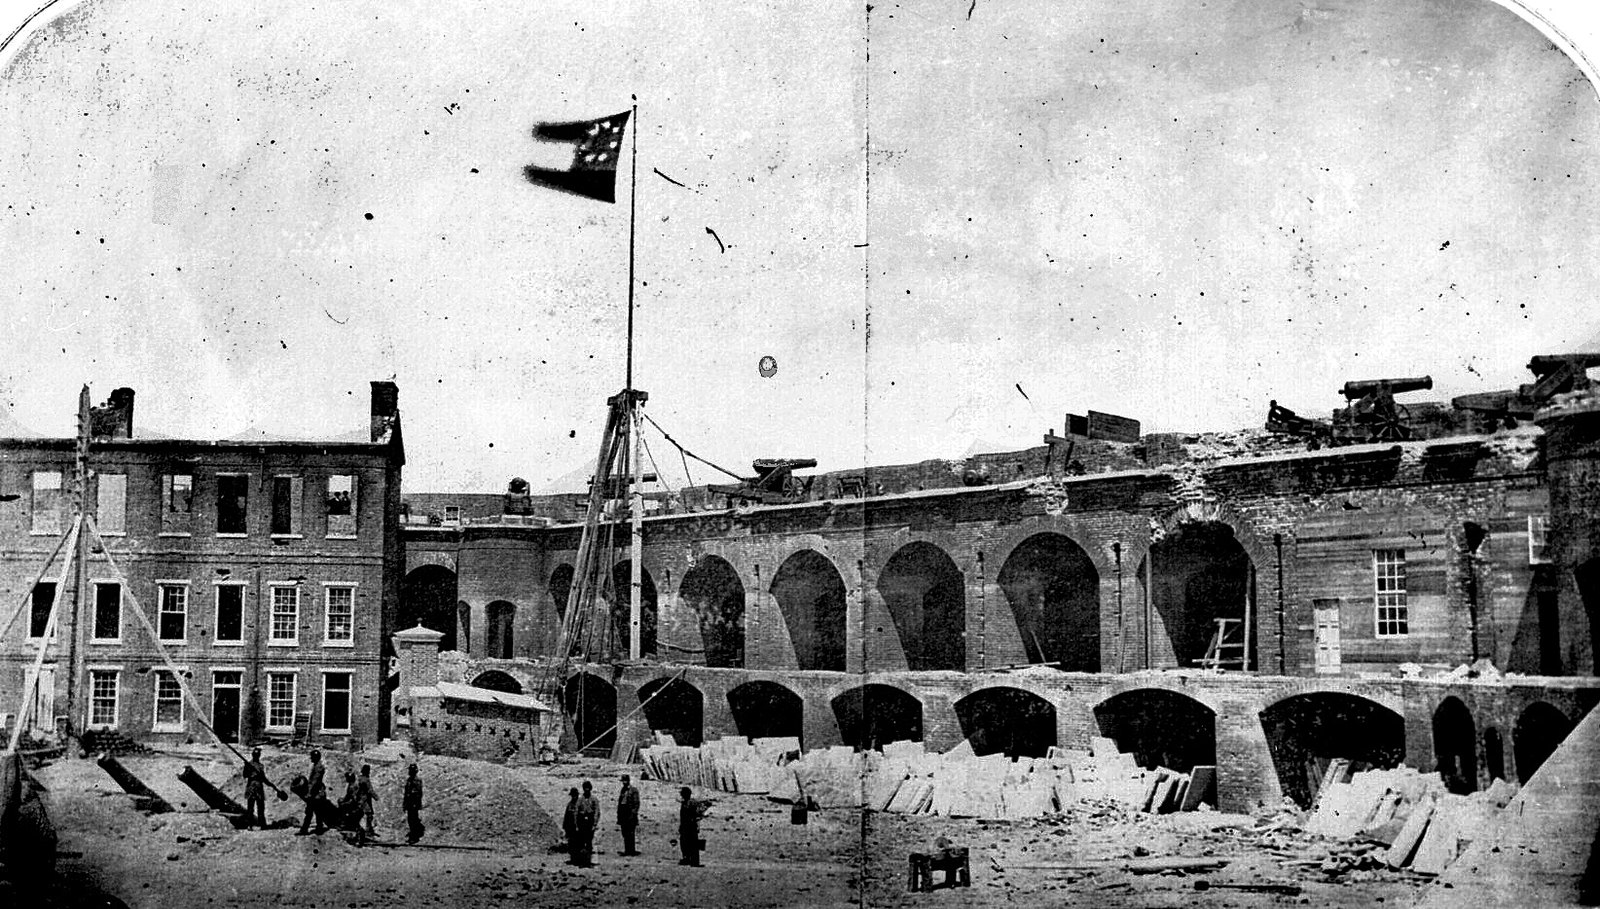 Fort Sumter in the Charleston Harbor in Charleston, South Carolina, April 14, 1861, under the first Confederate national flag (the 'Stars and Bars')